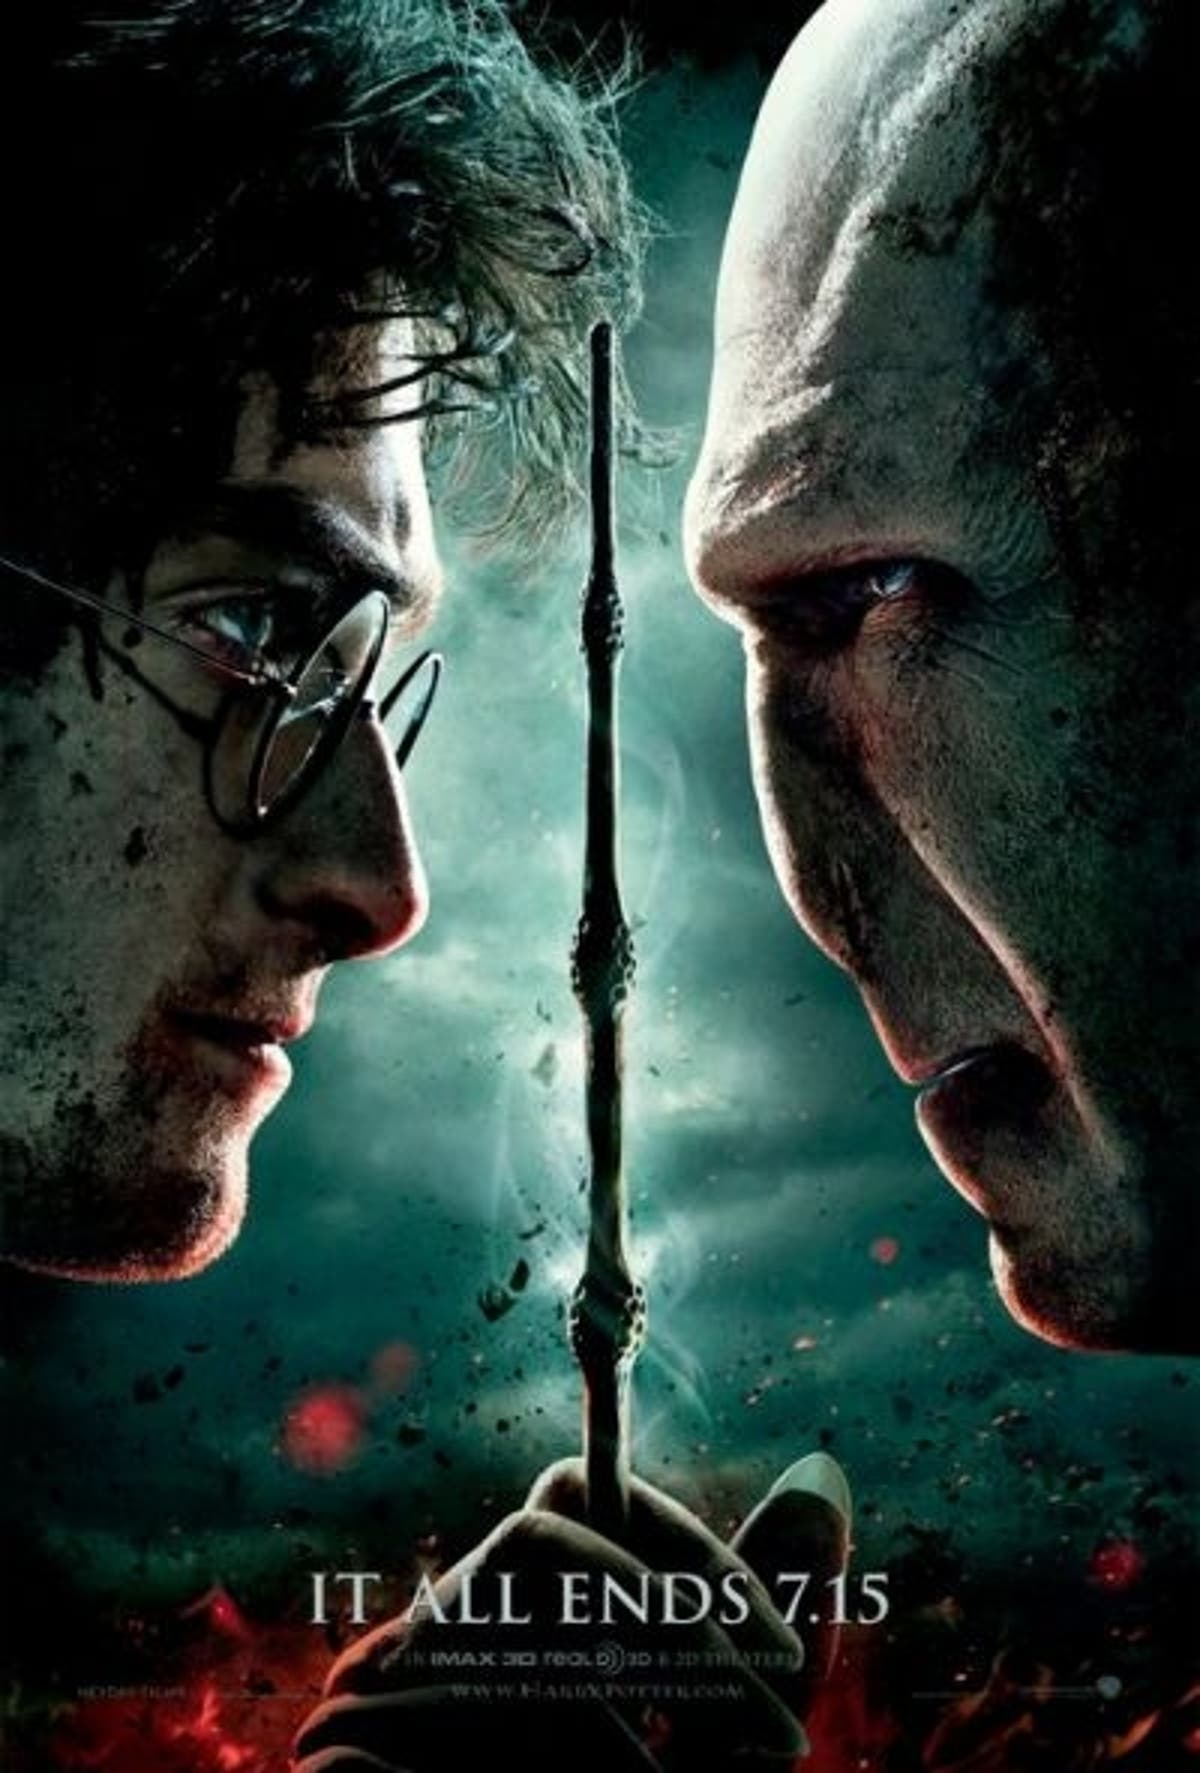 Harry Potter And The Deathly Hallows, Teaser Trailer